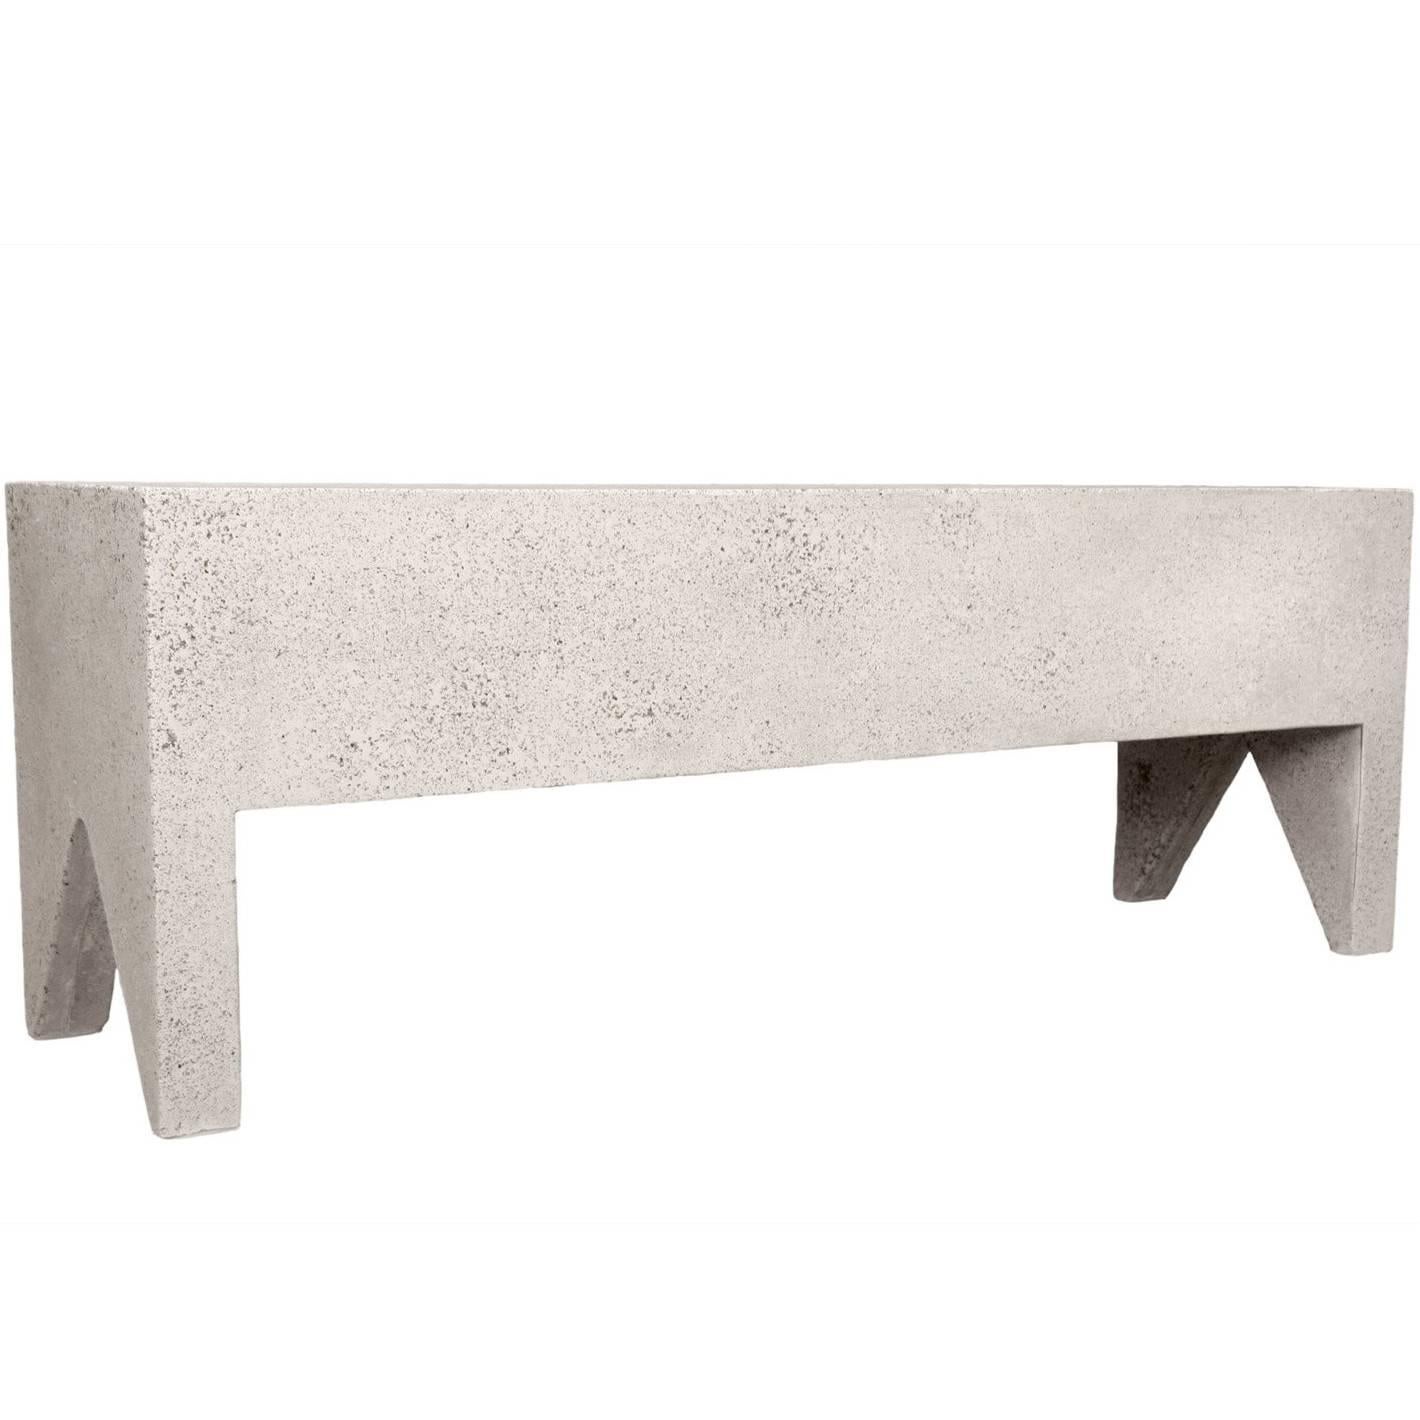 Cast Resin 'Farm' Bench, Natural Stone Finish by Zachary A. Design